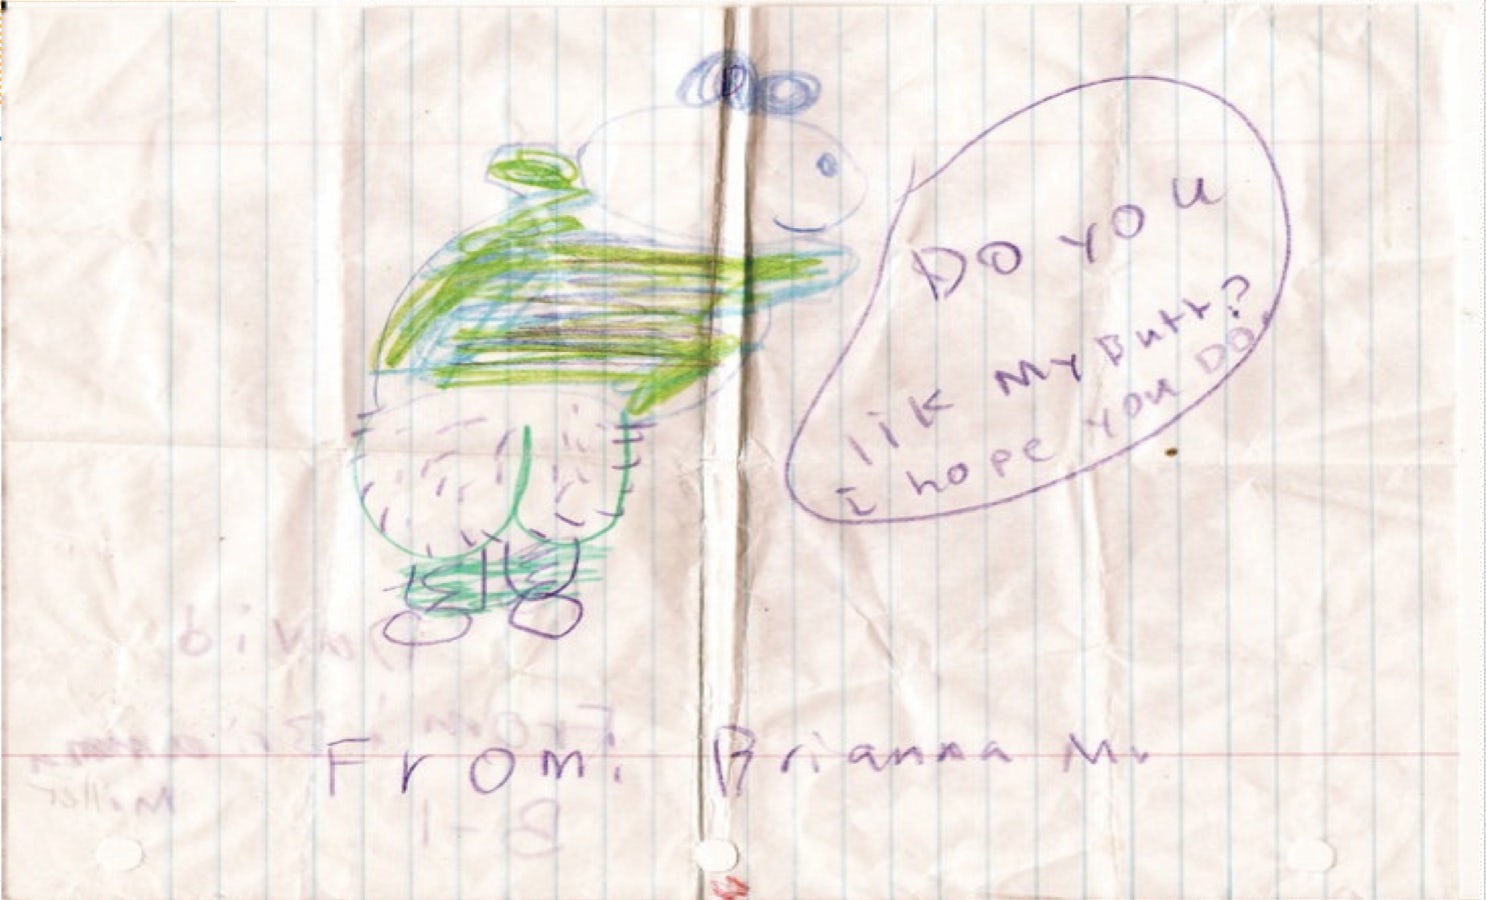 Brianna Miller's First Grade doodle, which got her suspended